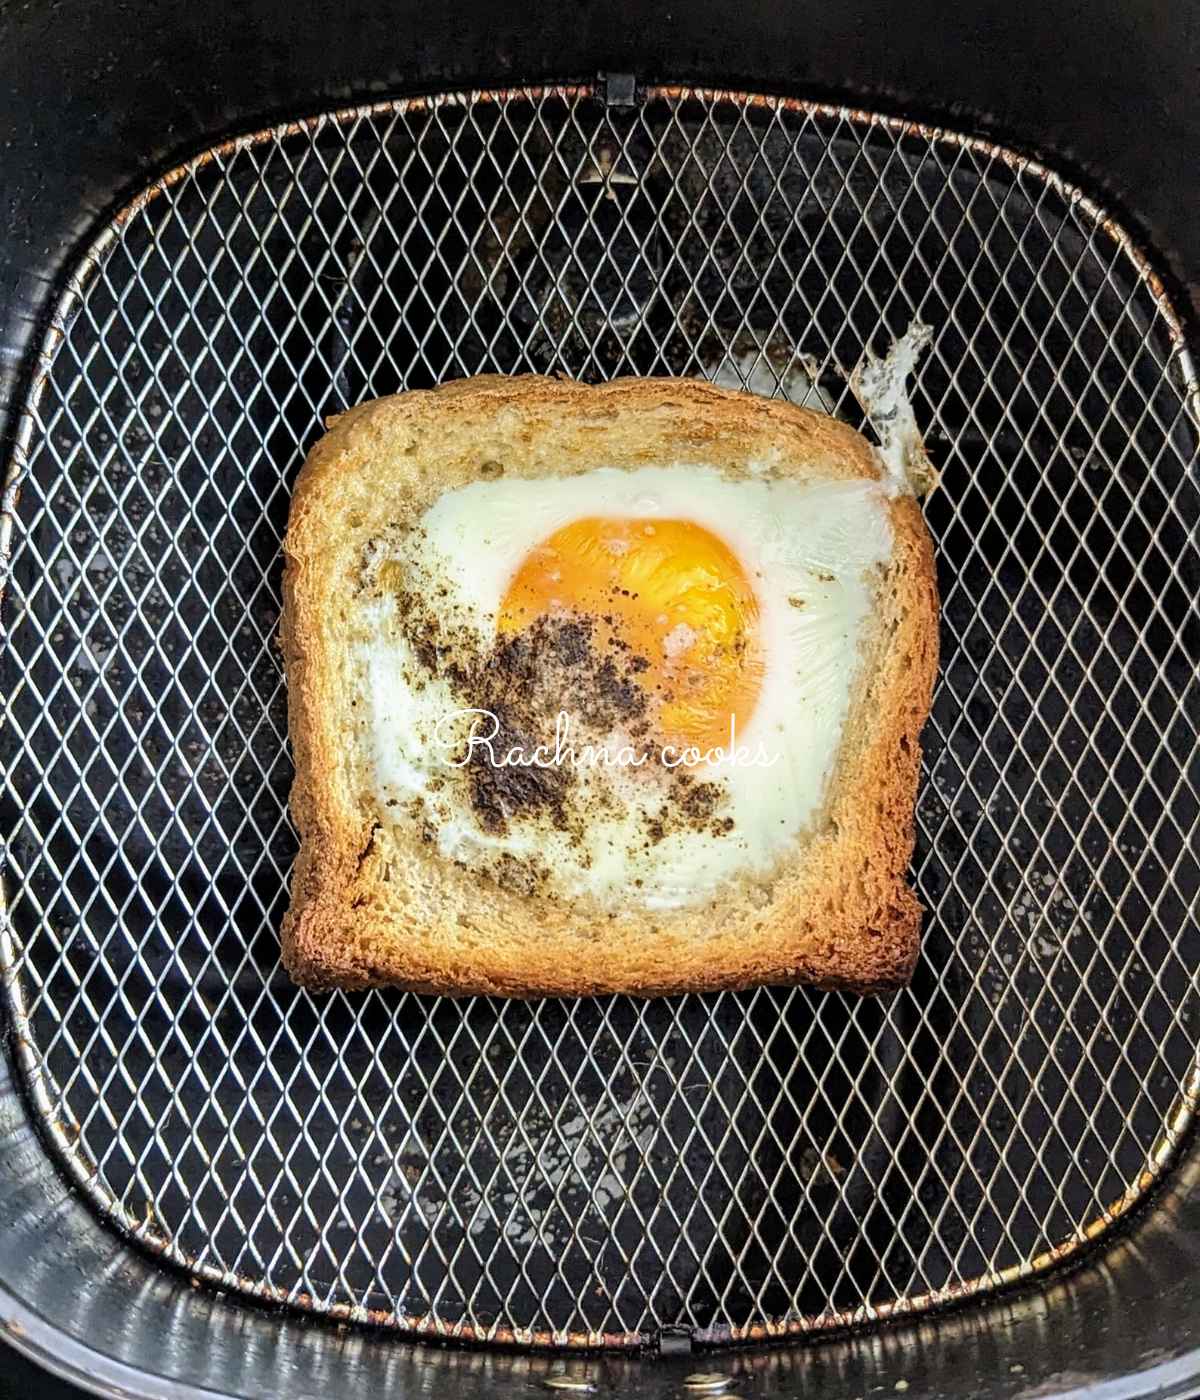 Egg toast with salt and pepper on air fryer basket.